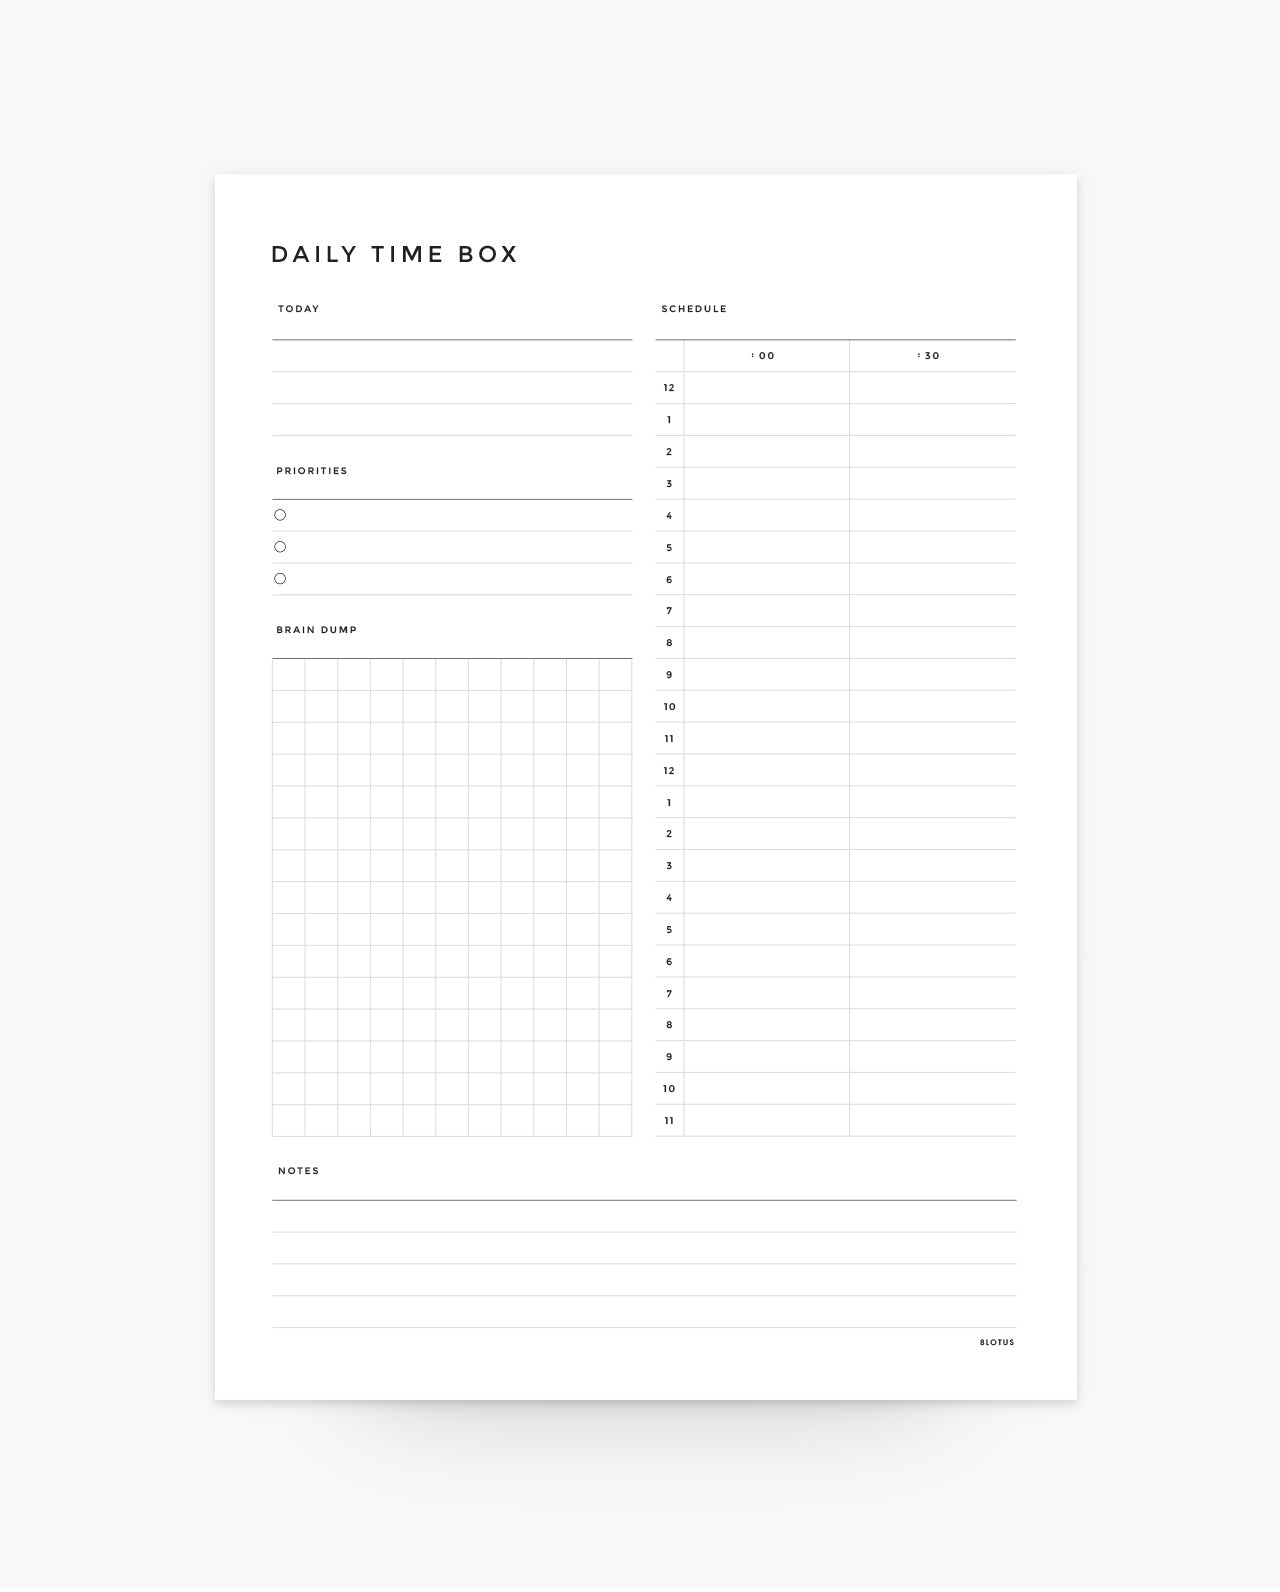 MN068 - Daily Time Box - Notepad